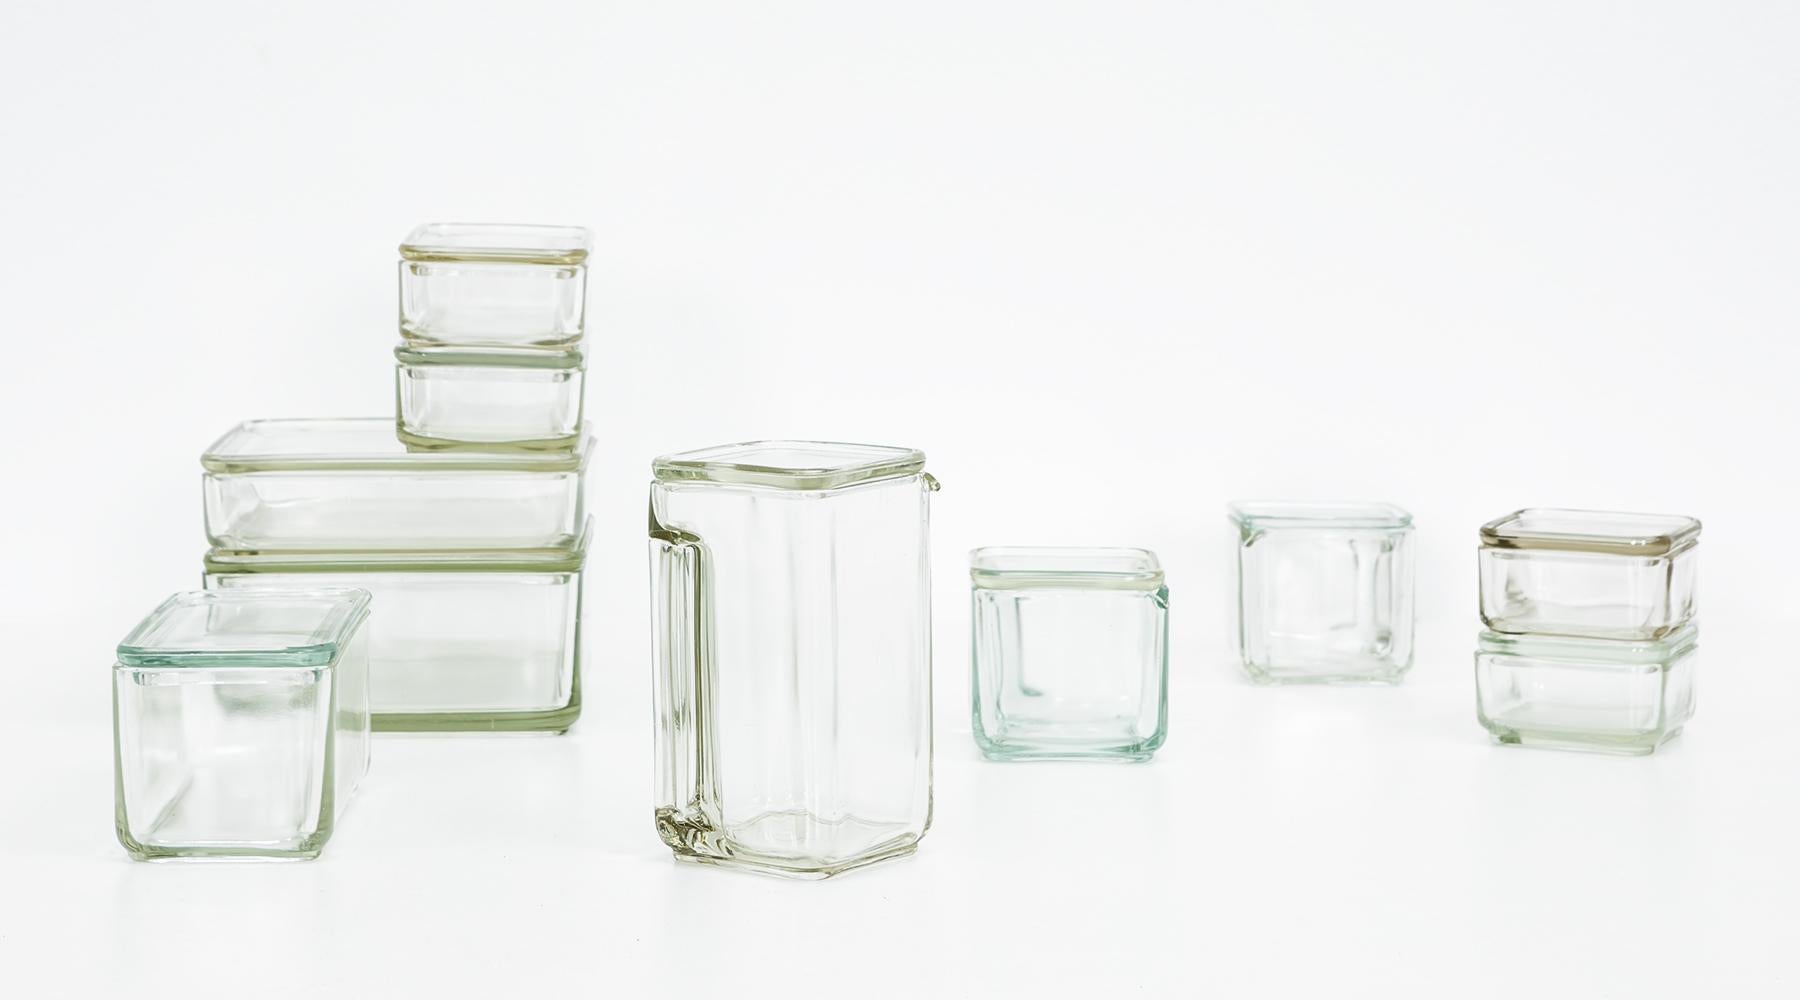 Bauhaus 1930s Glass Containers by Wilhelm Wagenfeld For Sale